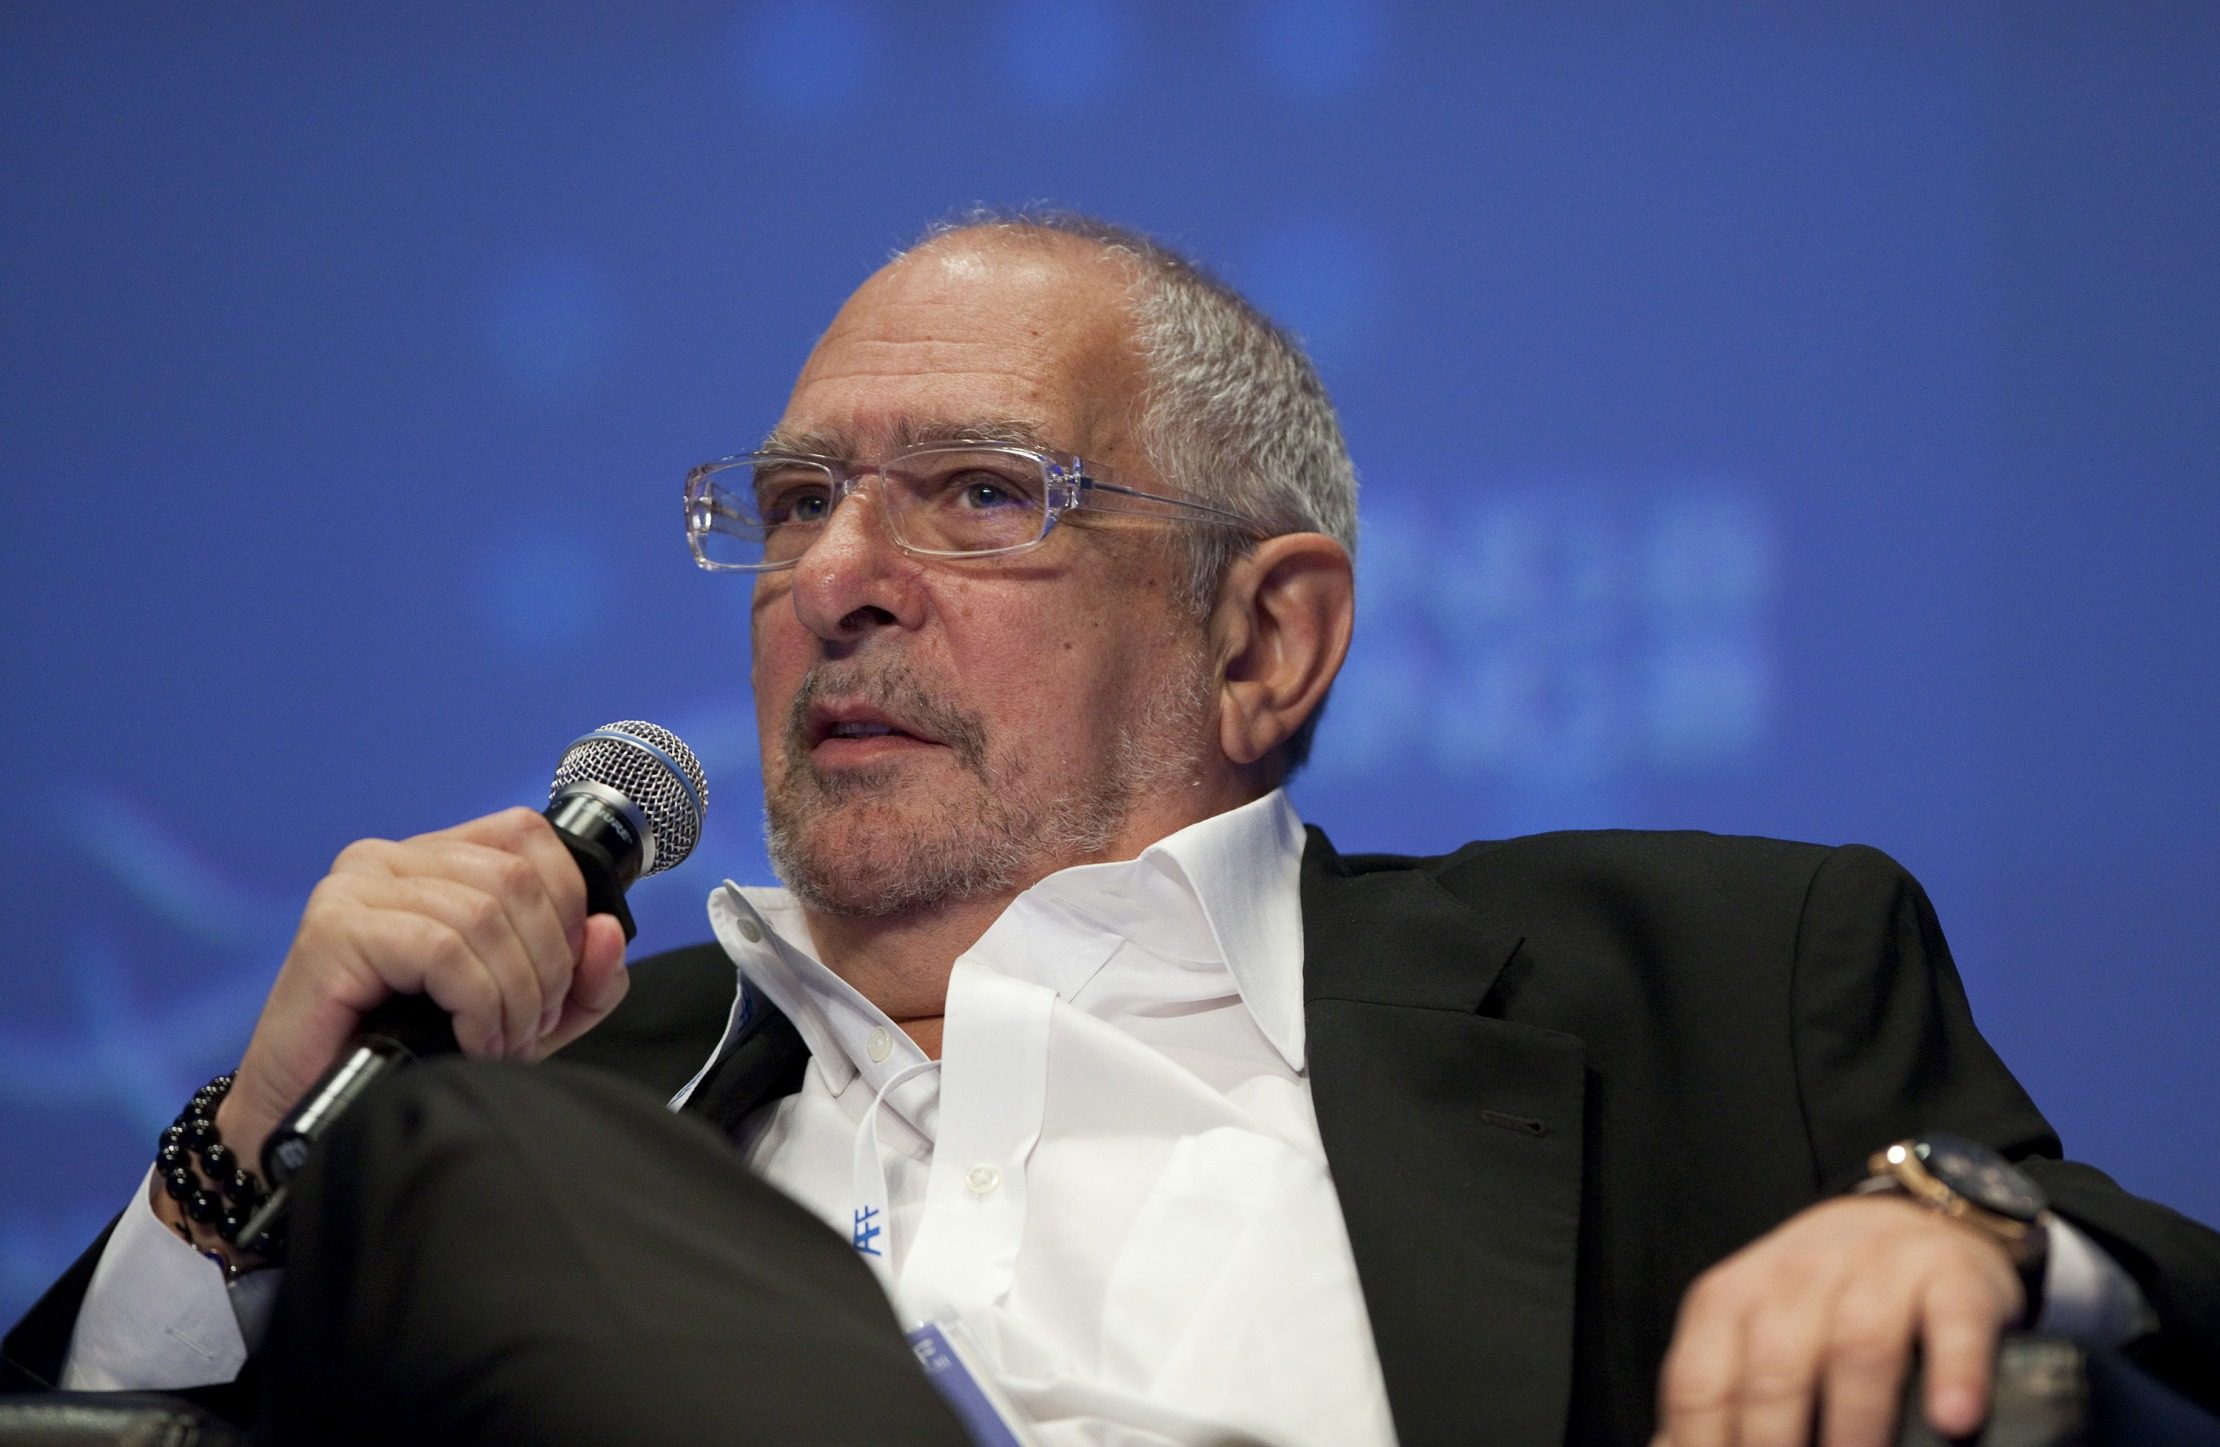 Noble's Richard Elman steps down as commodity trader strives to survive